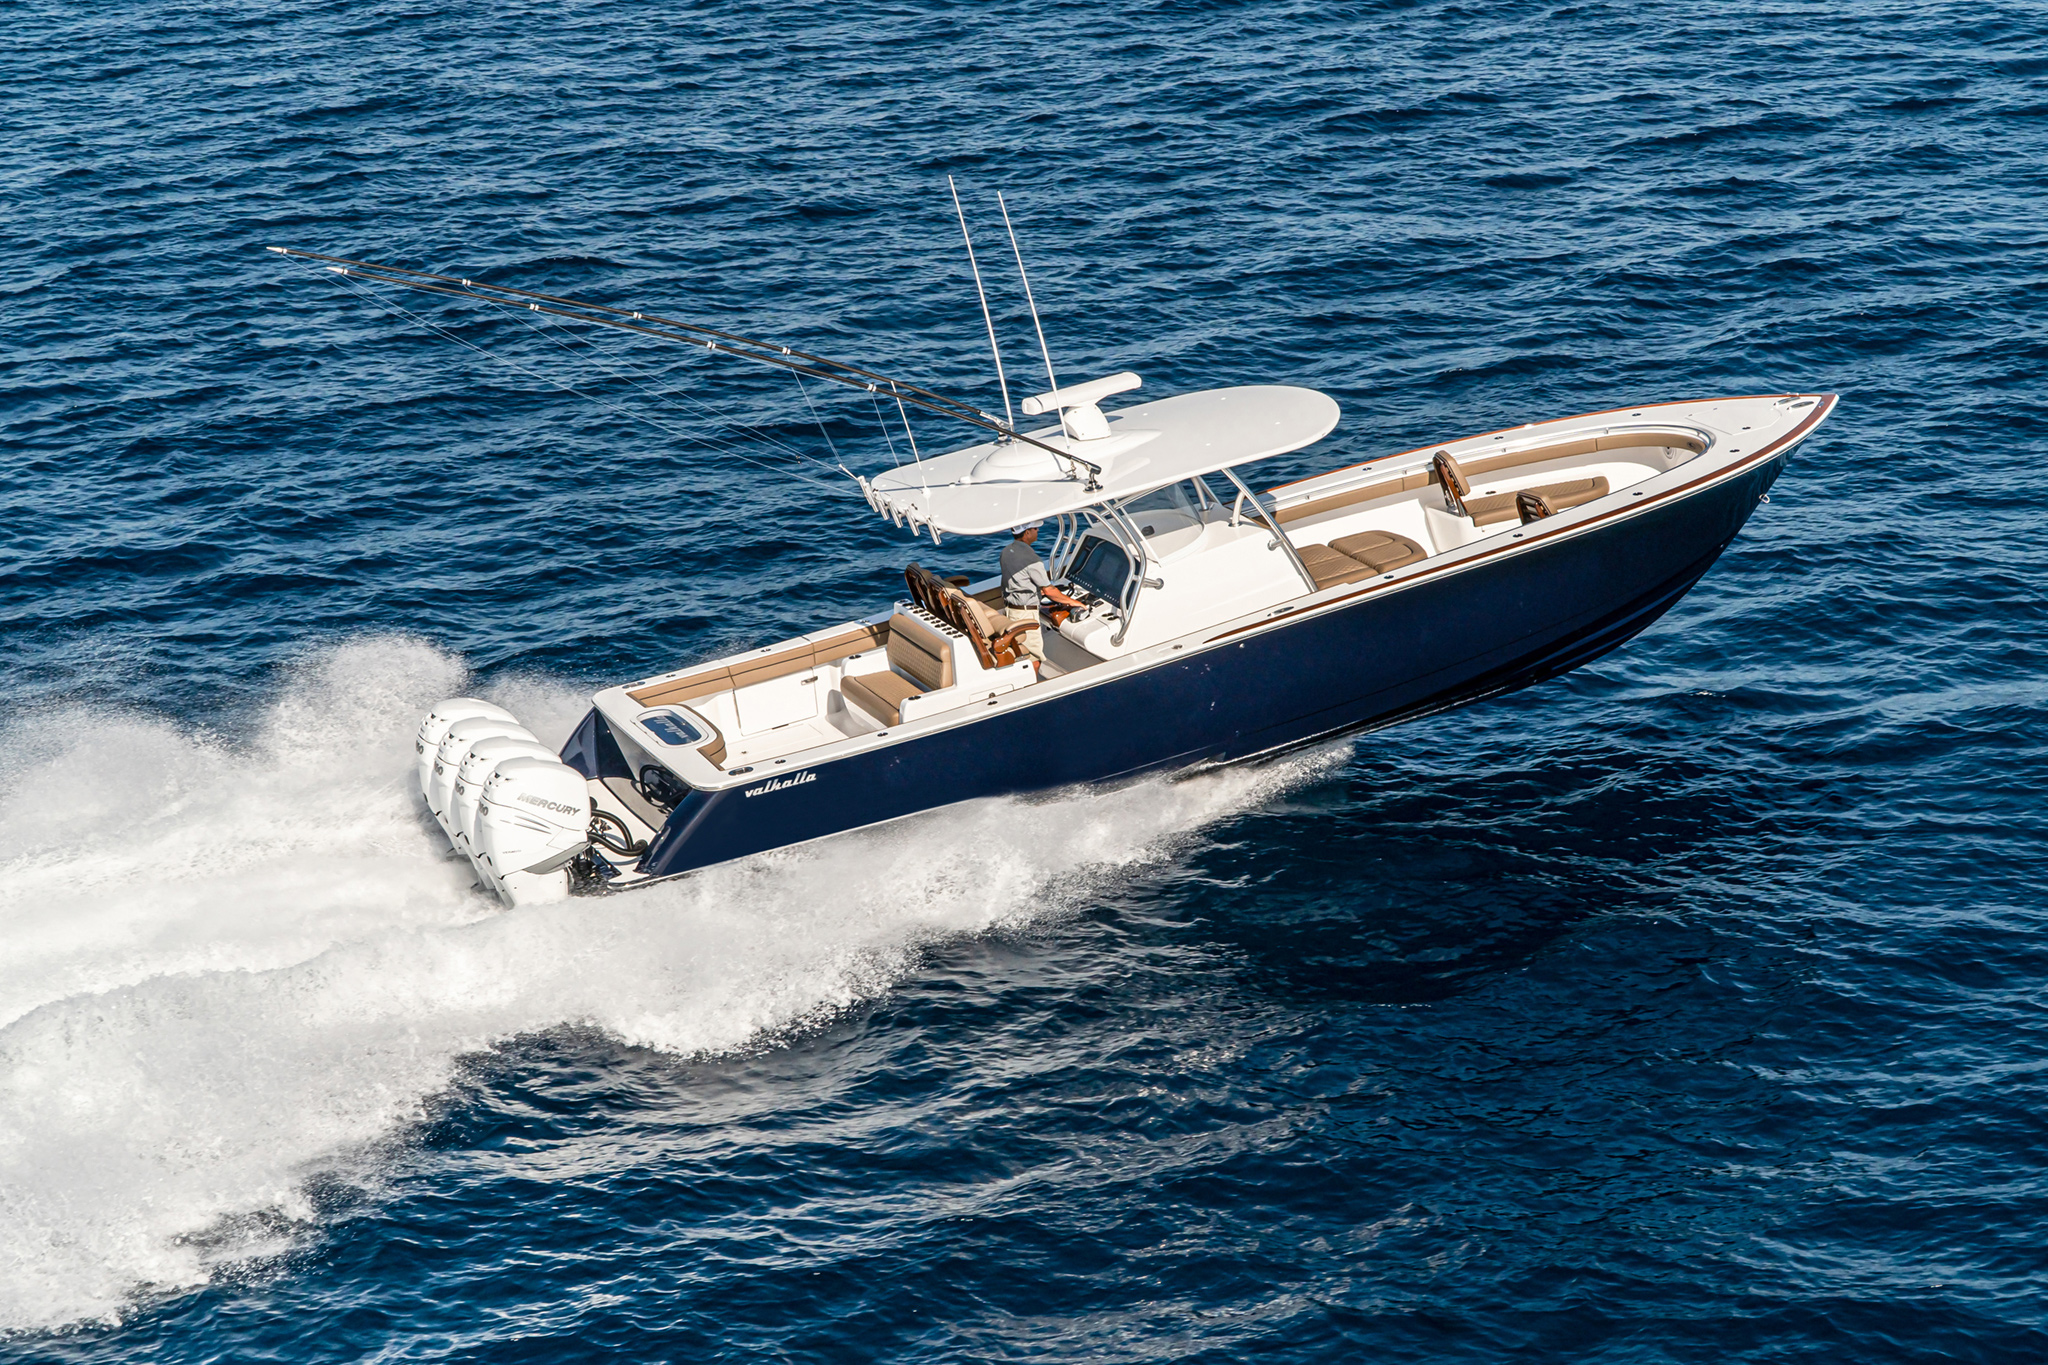 The flagship hits 74 mph with quad Mercury 400s.